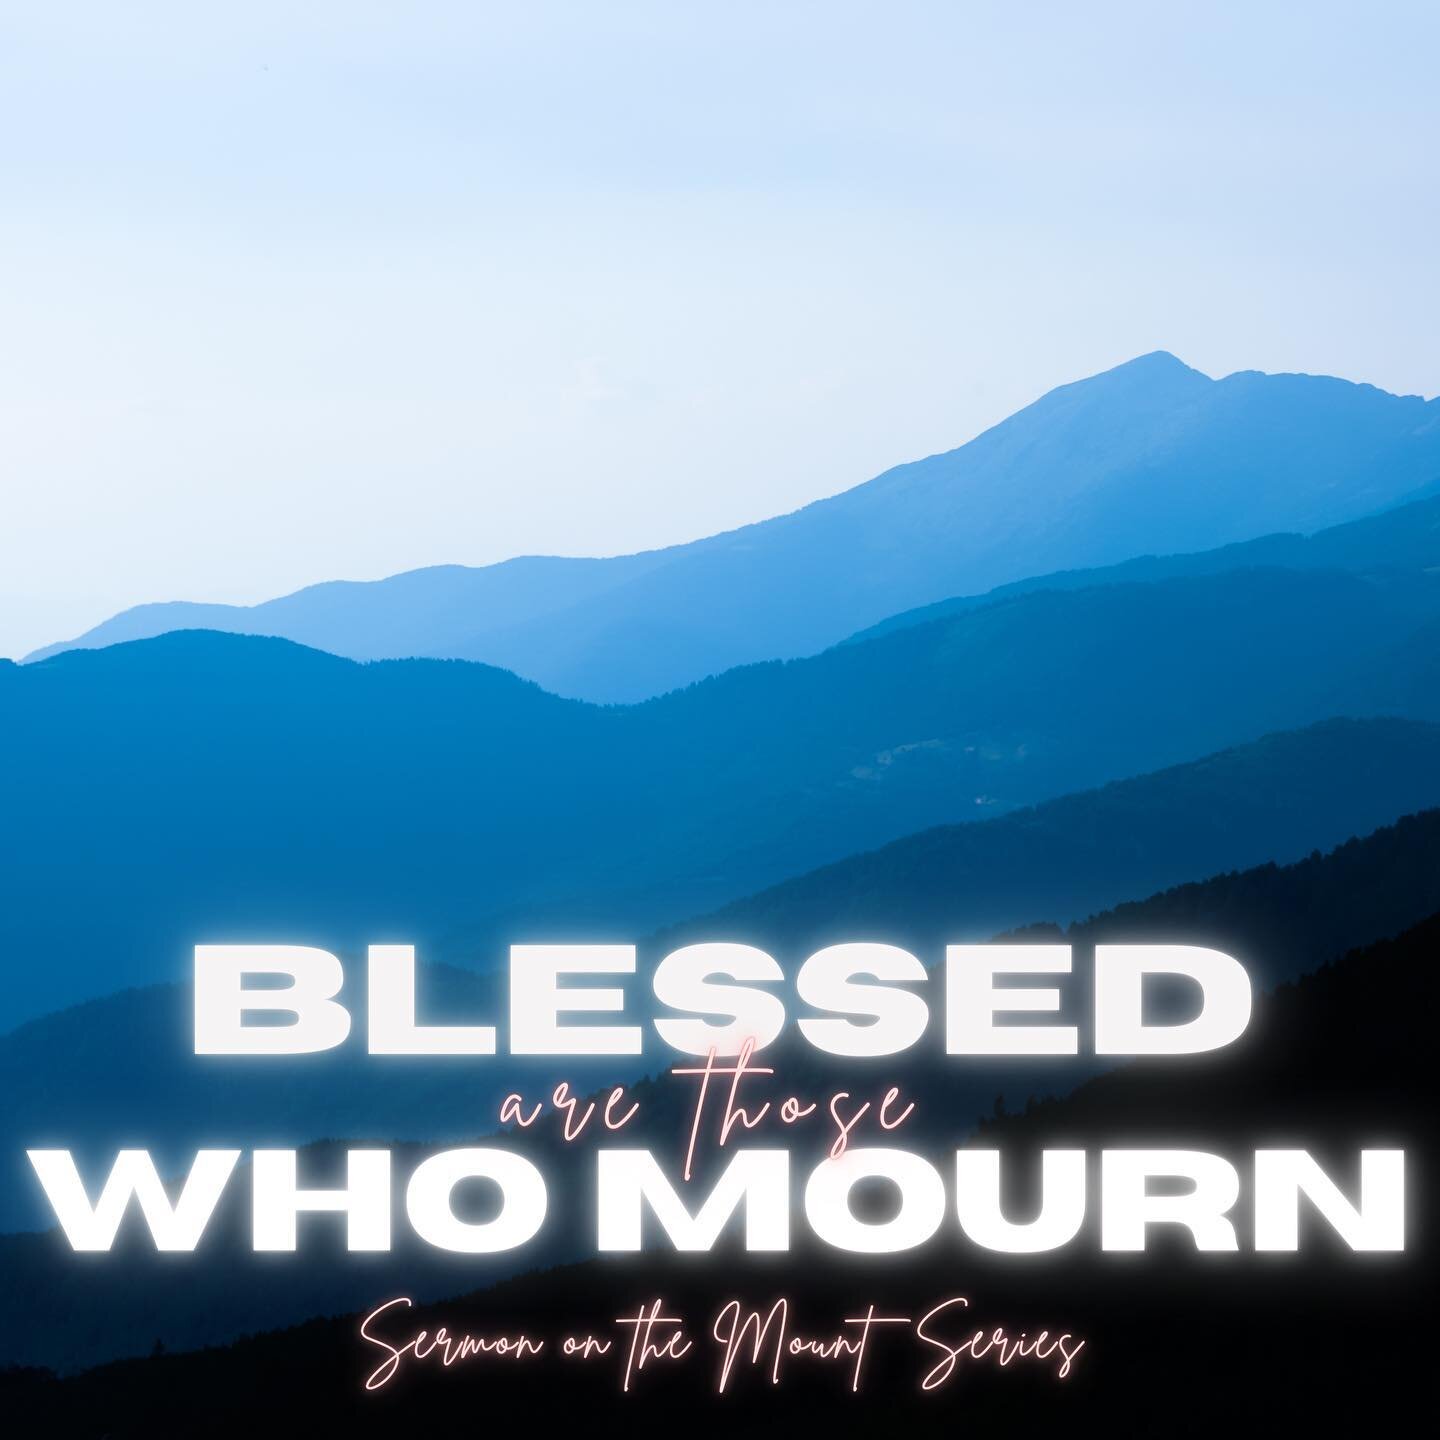 ... for they will be comforted. 💙 If you are going through a hard season, this bible talk is for you! Send us a message if you would like to join the next lesson in our sermon on the mount series. Tonight at 7pm!

#mourning #grief #sermononthemount 